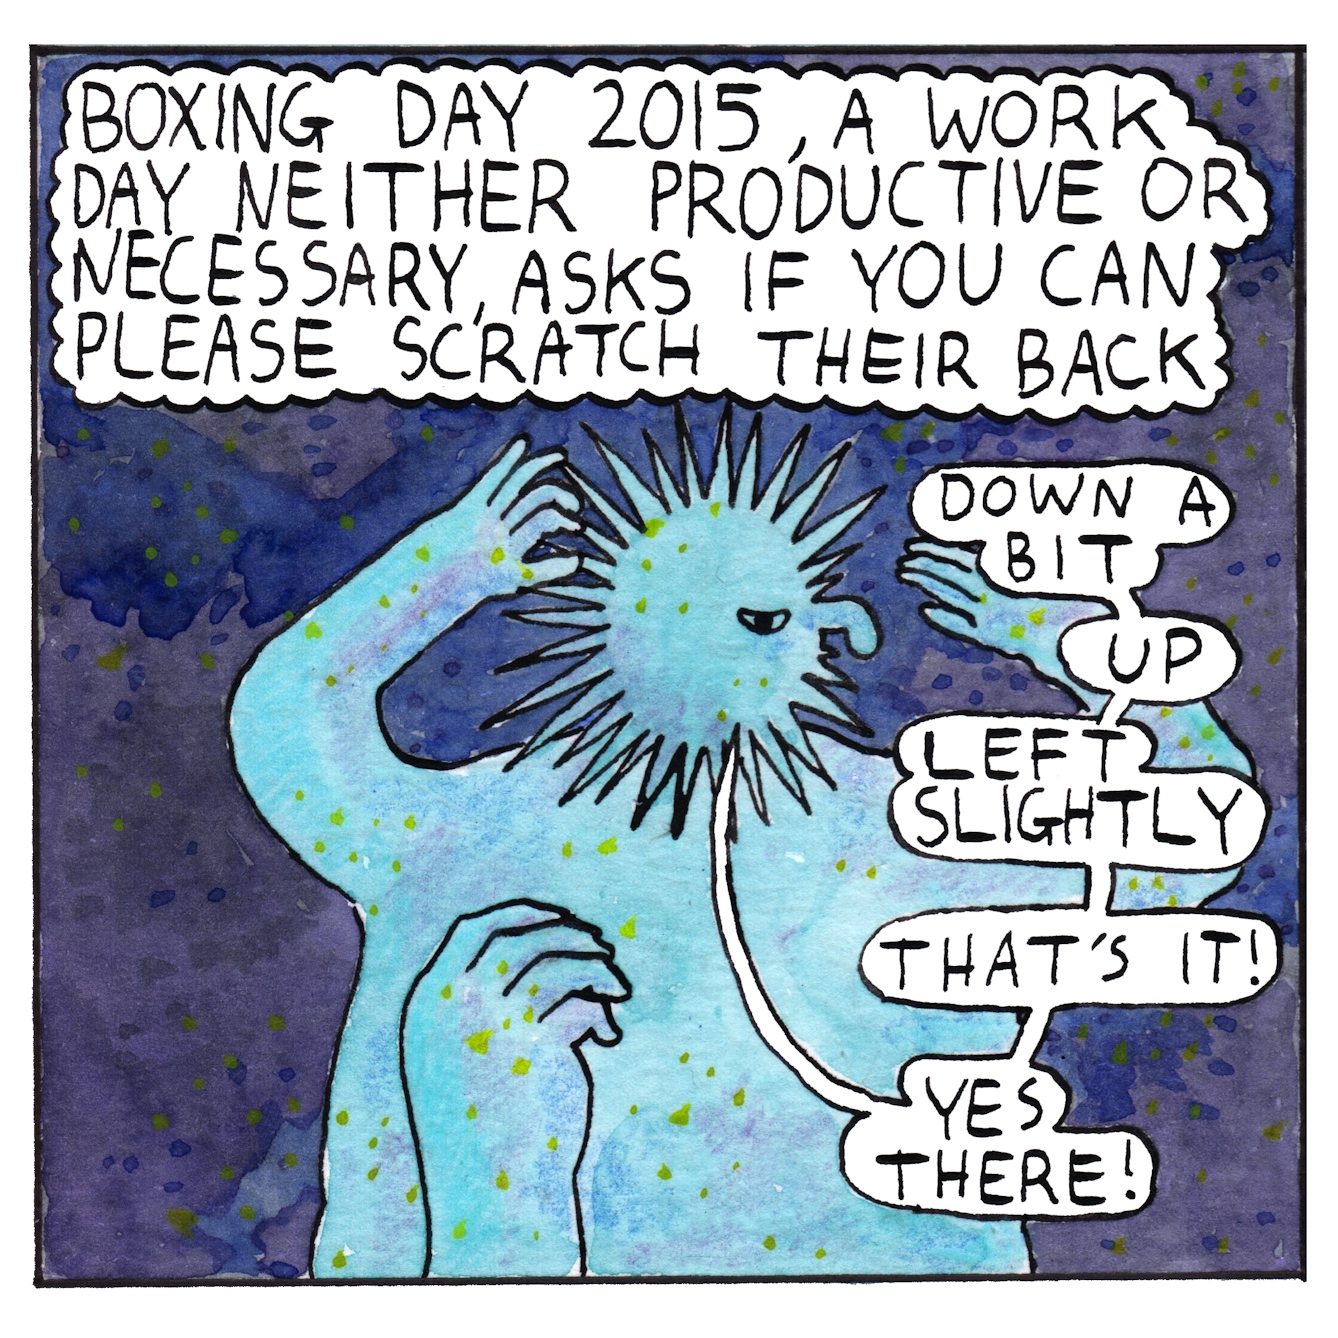 Panel five of a six-panel comic made with ink, watercolour and colour pencils: Against a deep purple background, a creature with a round spiky head and human body stands with its back to the viewer. The creature has raised their arms and turned their head to look over their right shoulder at a large hand scratching their back. A text bubble above the figure reads: “Boxing day 2015, a work day neither productive or necessary, asks if you can please scratch their back”. Speech bubbles coming from the creature say “Down a bit, up, left slightly. That’s it! Yes there!”